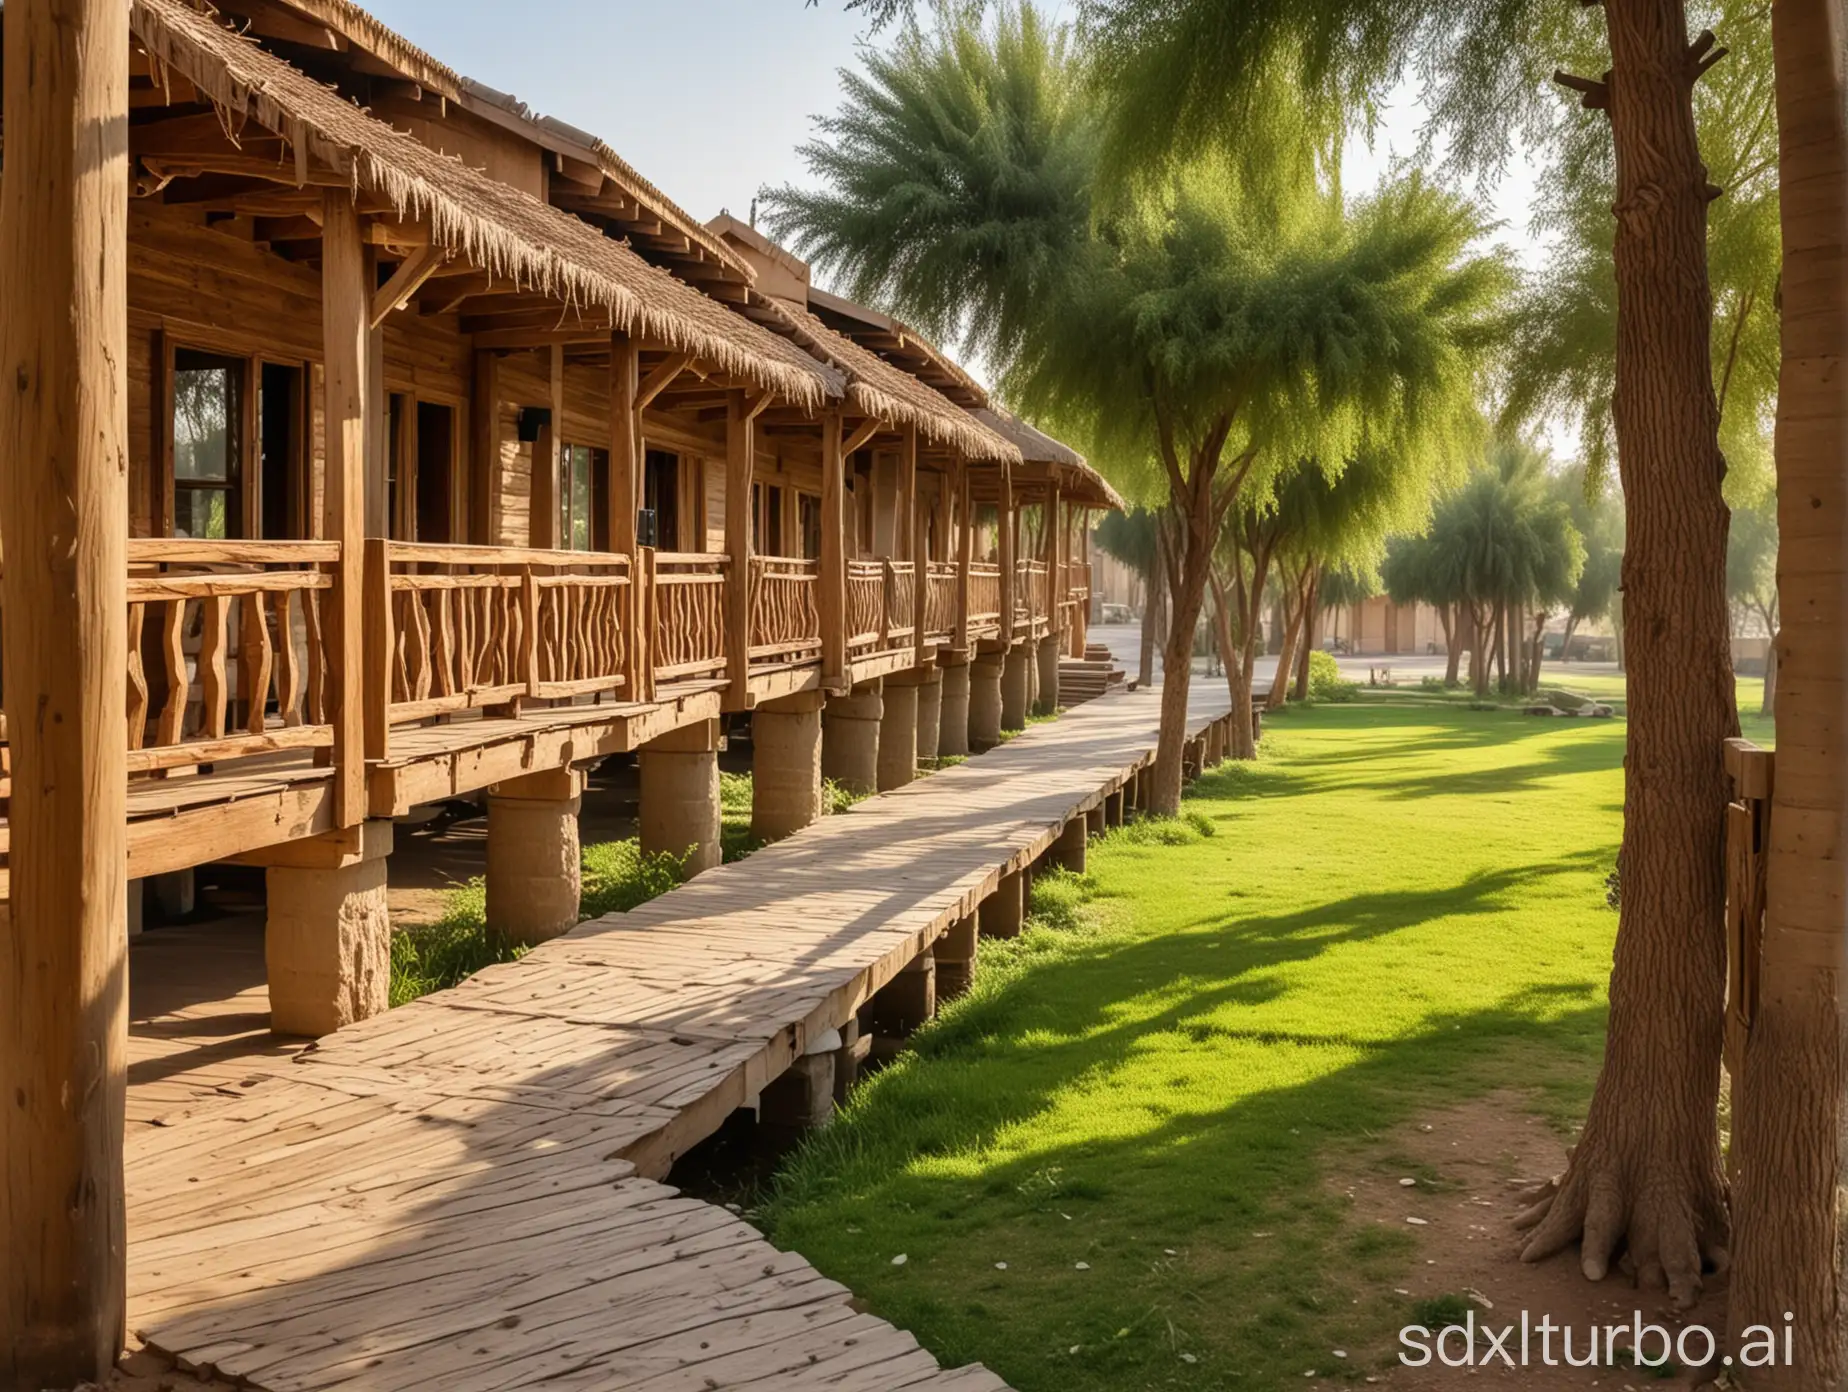 Baghdad , five tourist wood chalet on wooden columns linked between them with wooden walkway, green lawn, lush landscape, day time, sun rays,